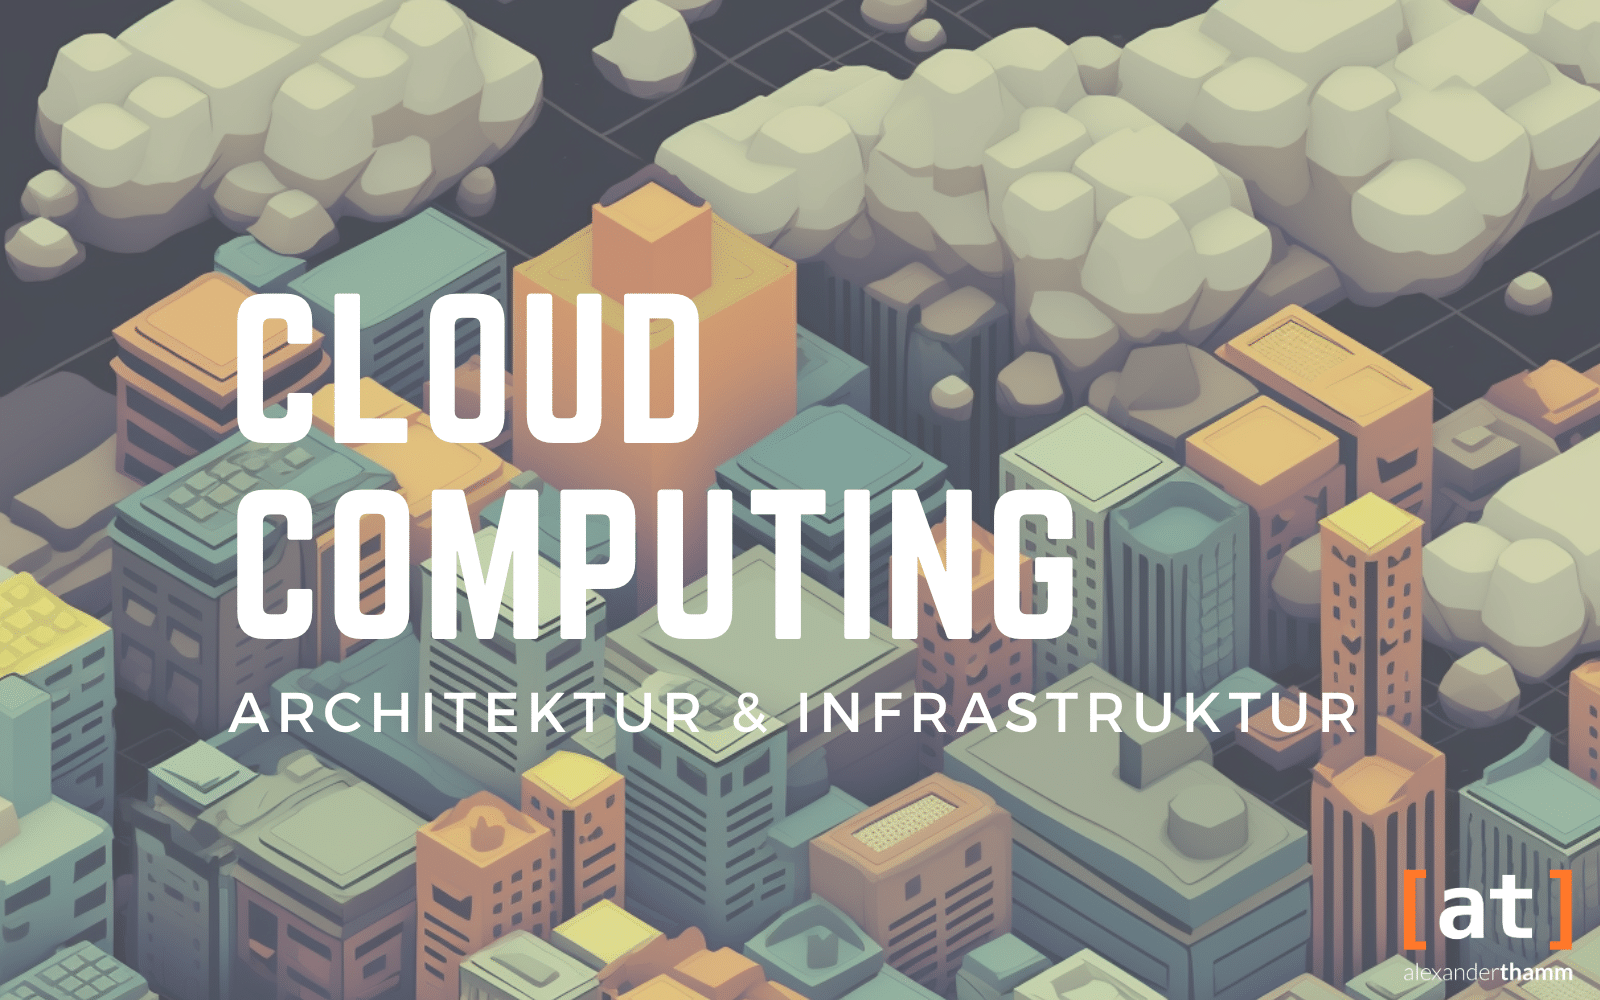 Cloud computing - architecture and infrastructure: compactly explained, an isometric view of a graphic-drawn city surrounded by clouds